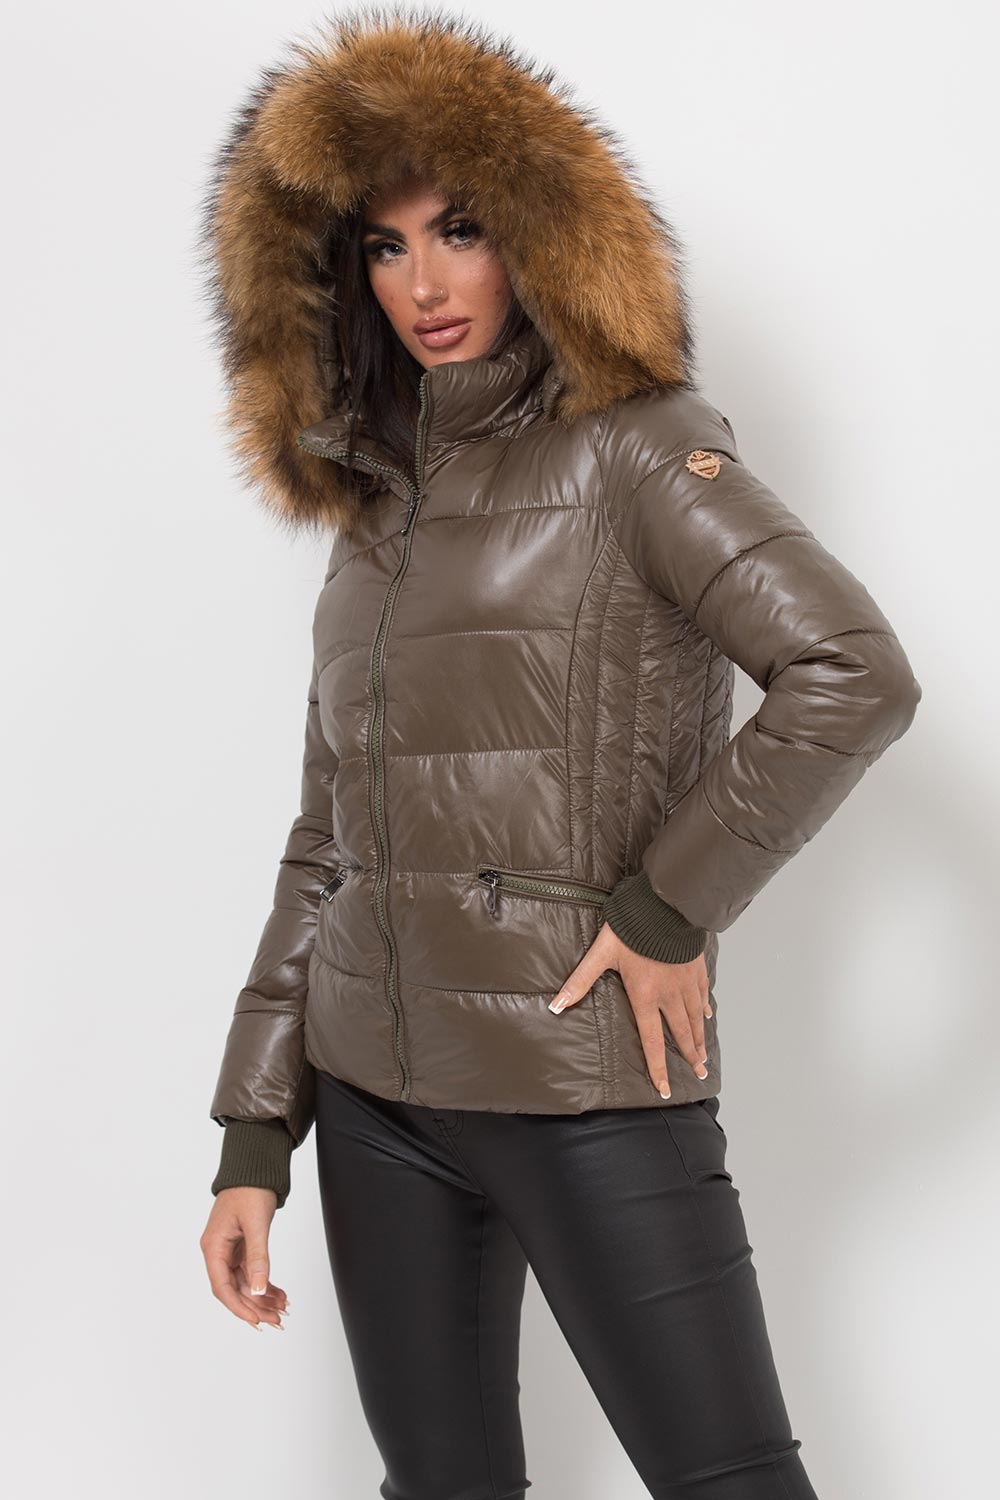 padded puffer jacket with real fur hood uk